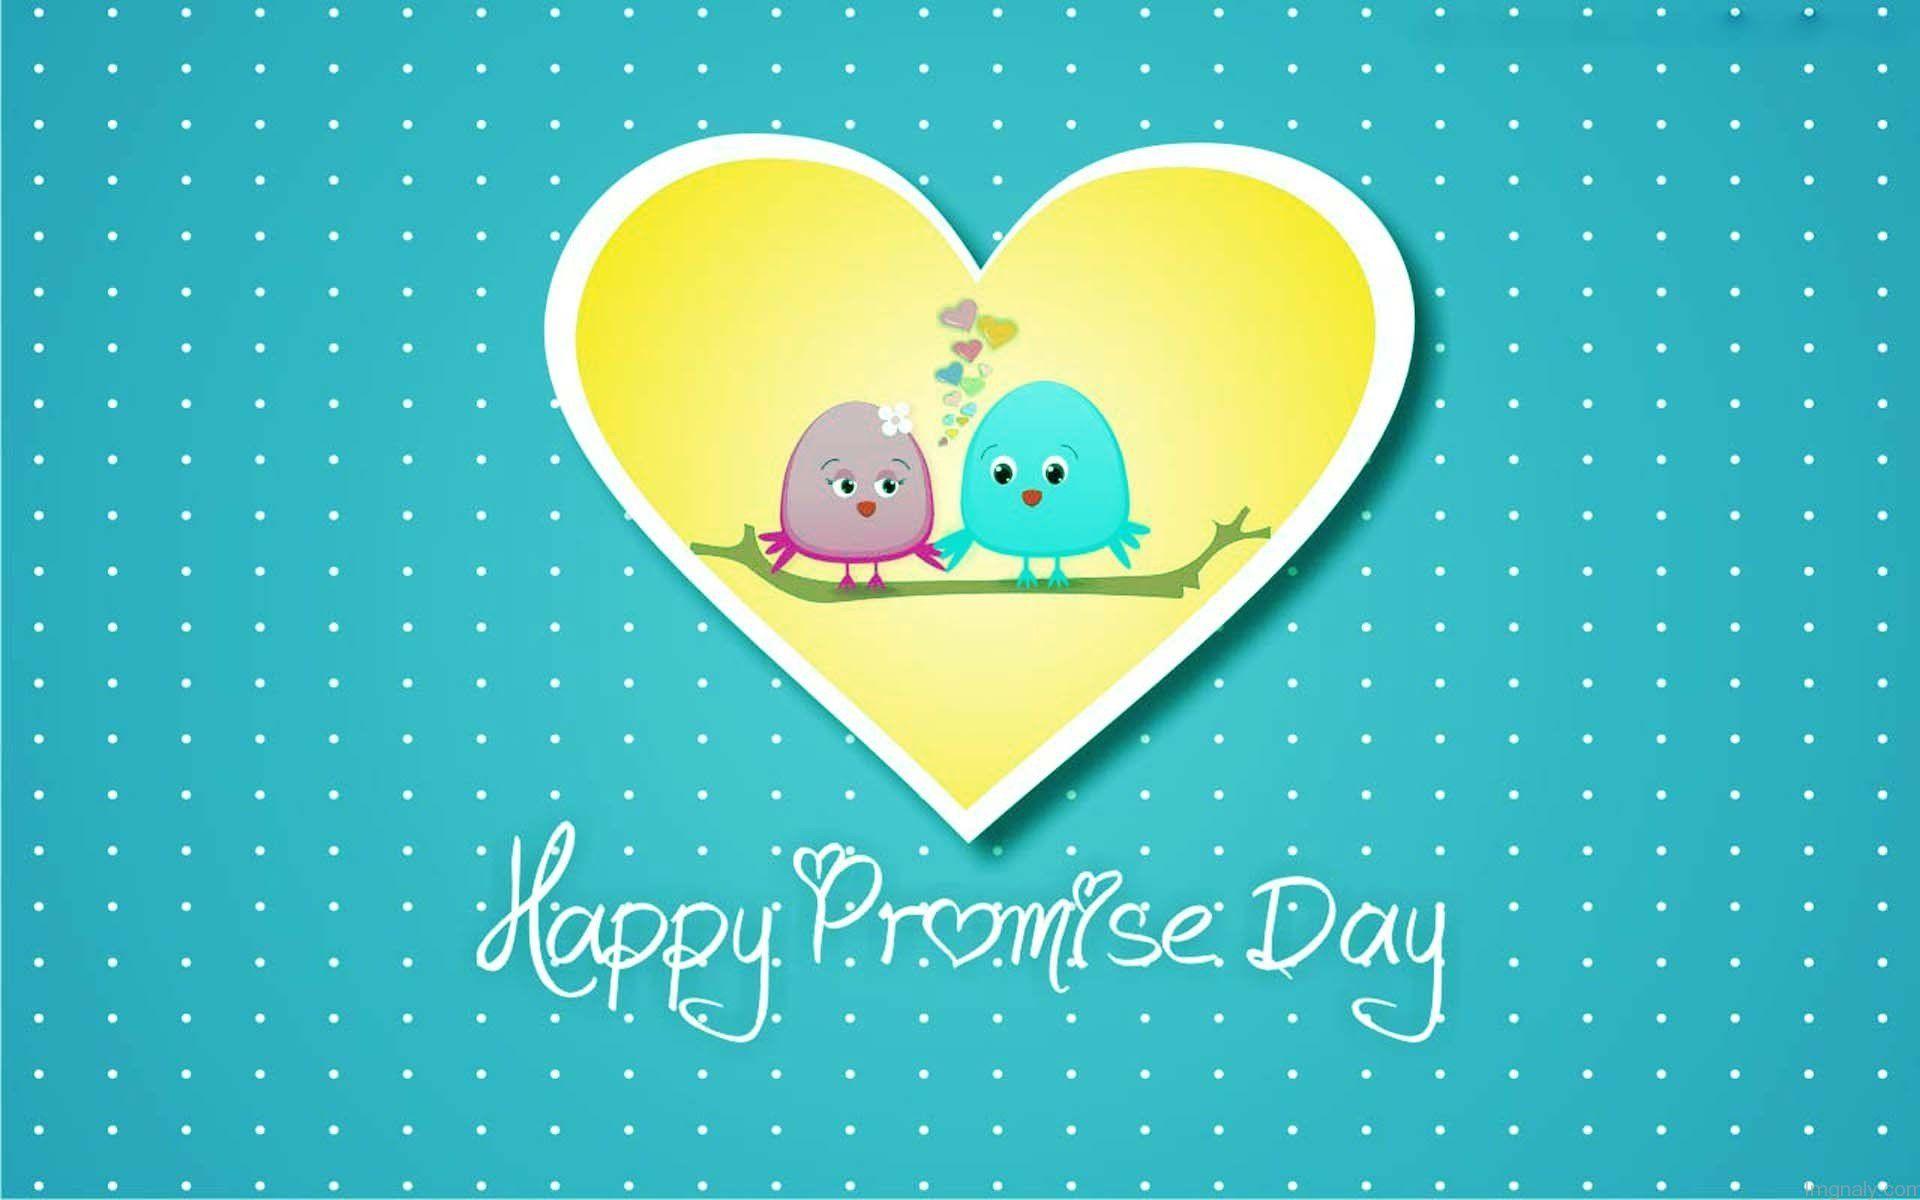 Happy Promise Day 2023 Images For Free Download - Digital Alia